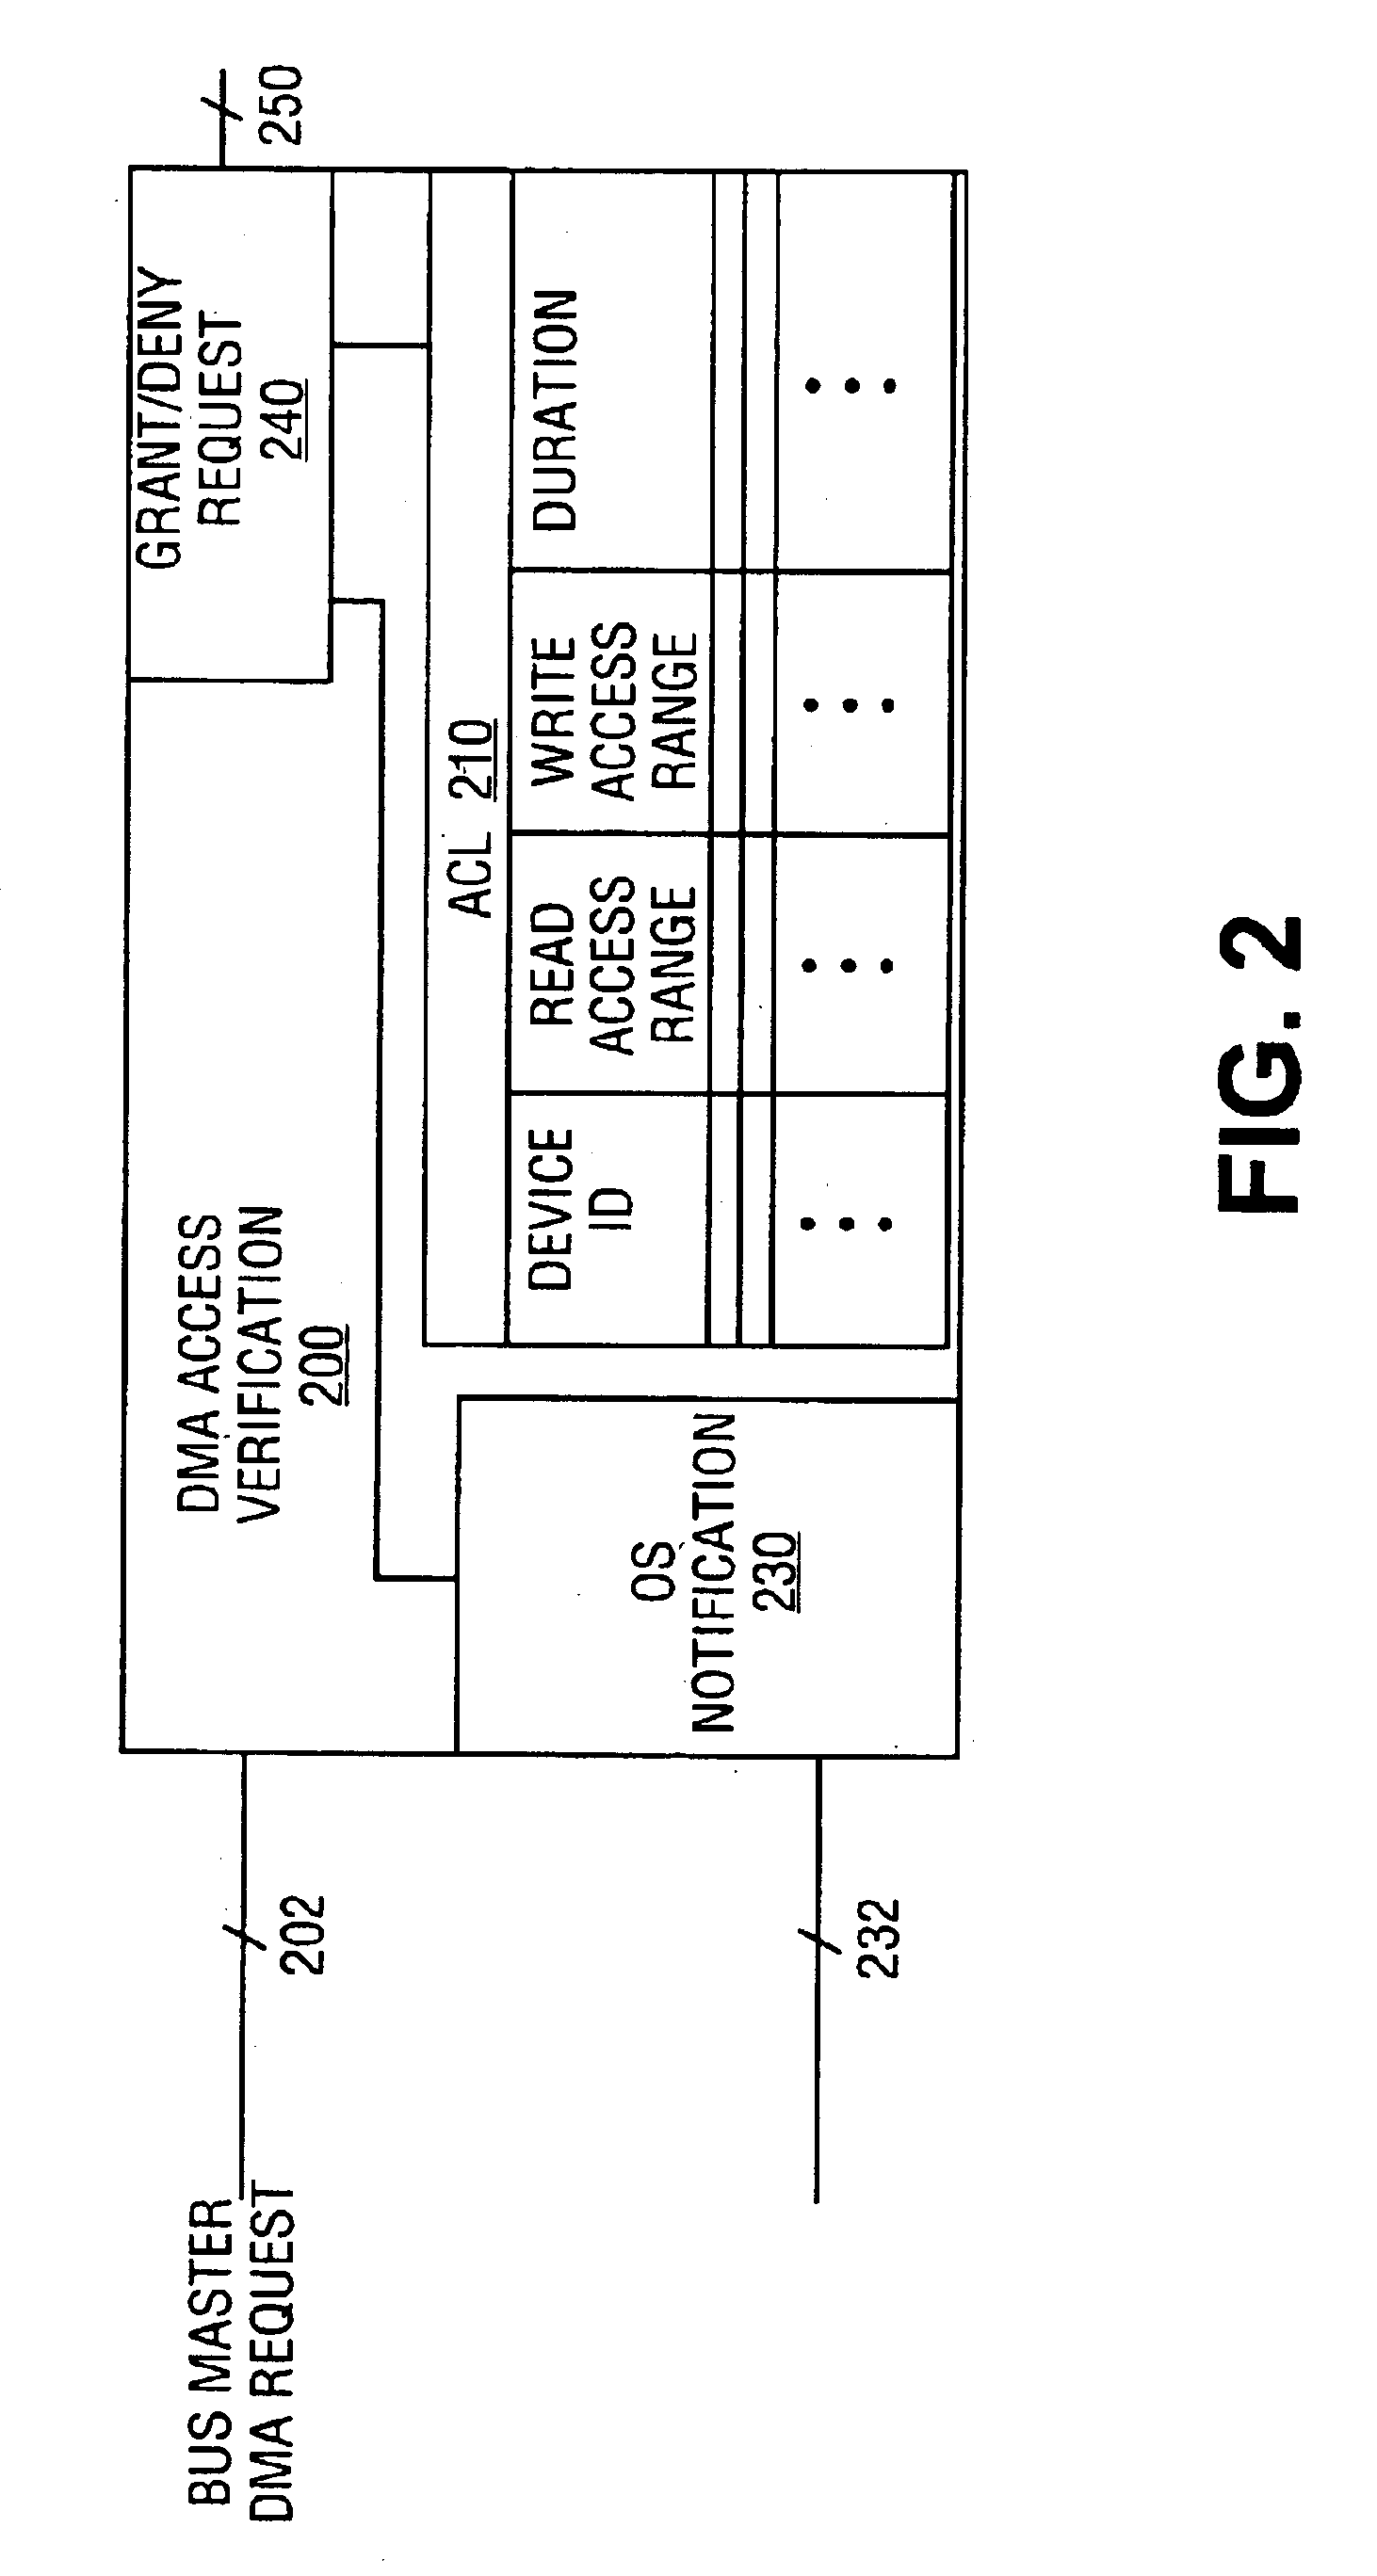 Apparatus and method of memory access control for bus masters